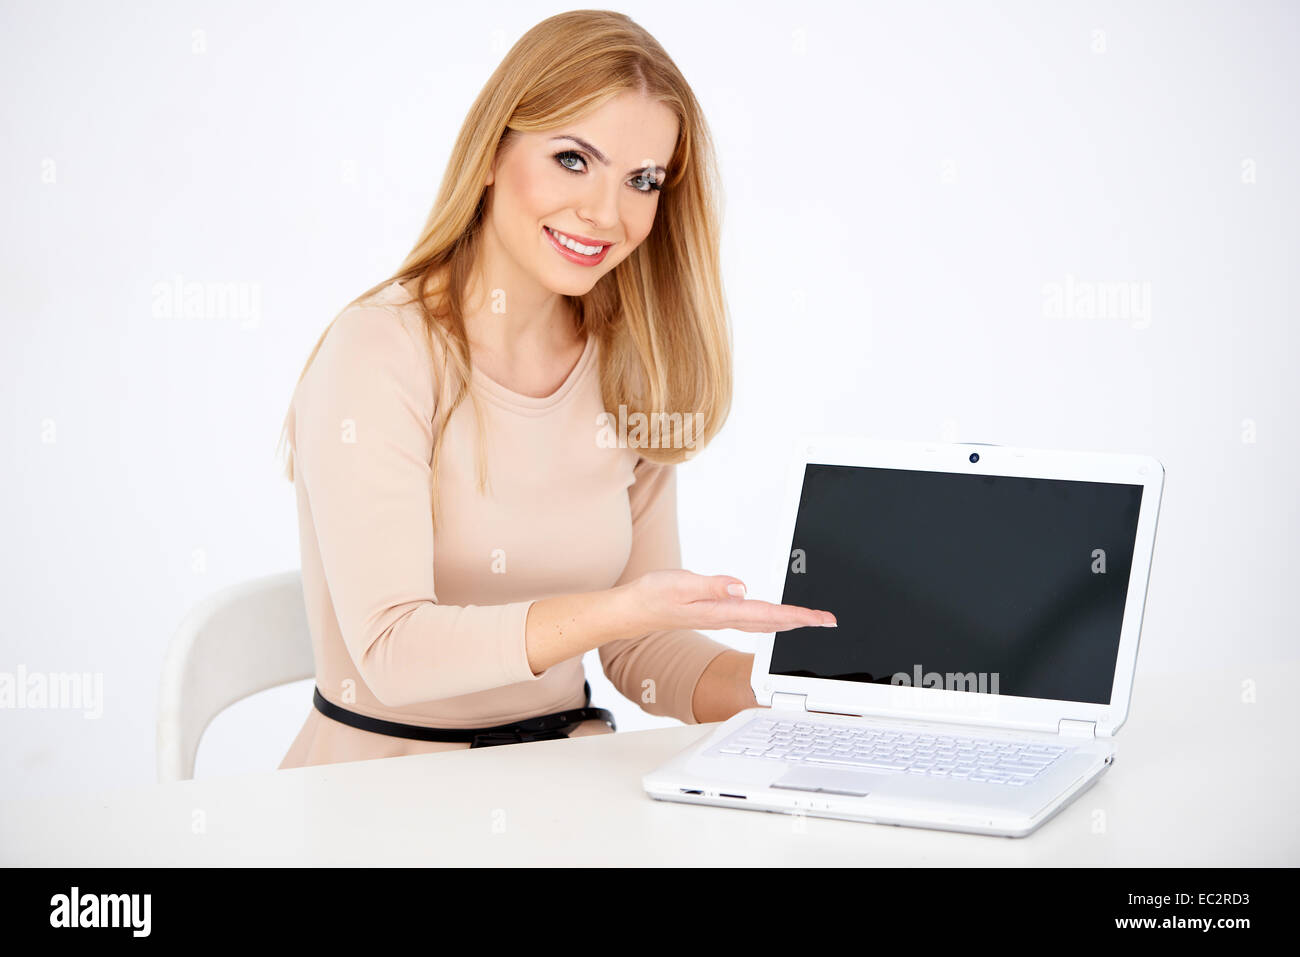 Sitting Smiling Woman Showing Laptop on Table Banque D'Images